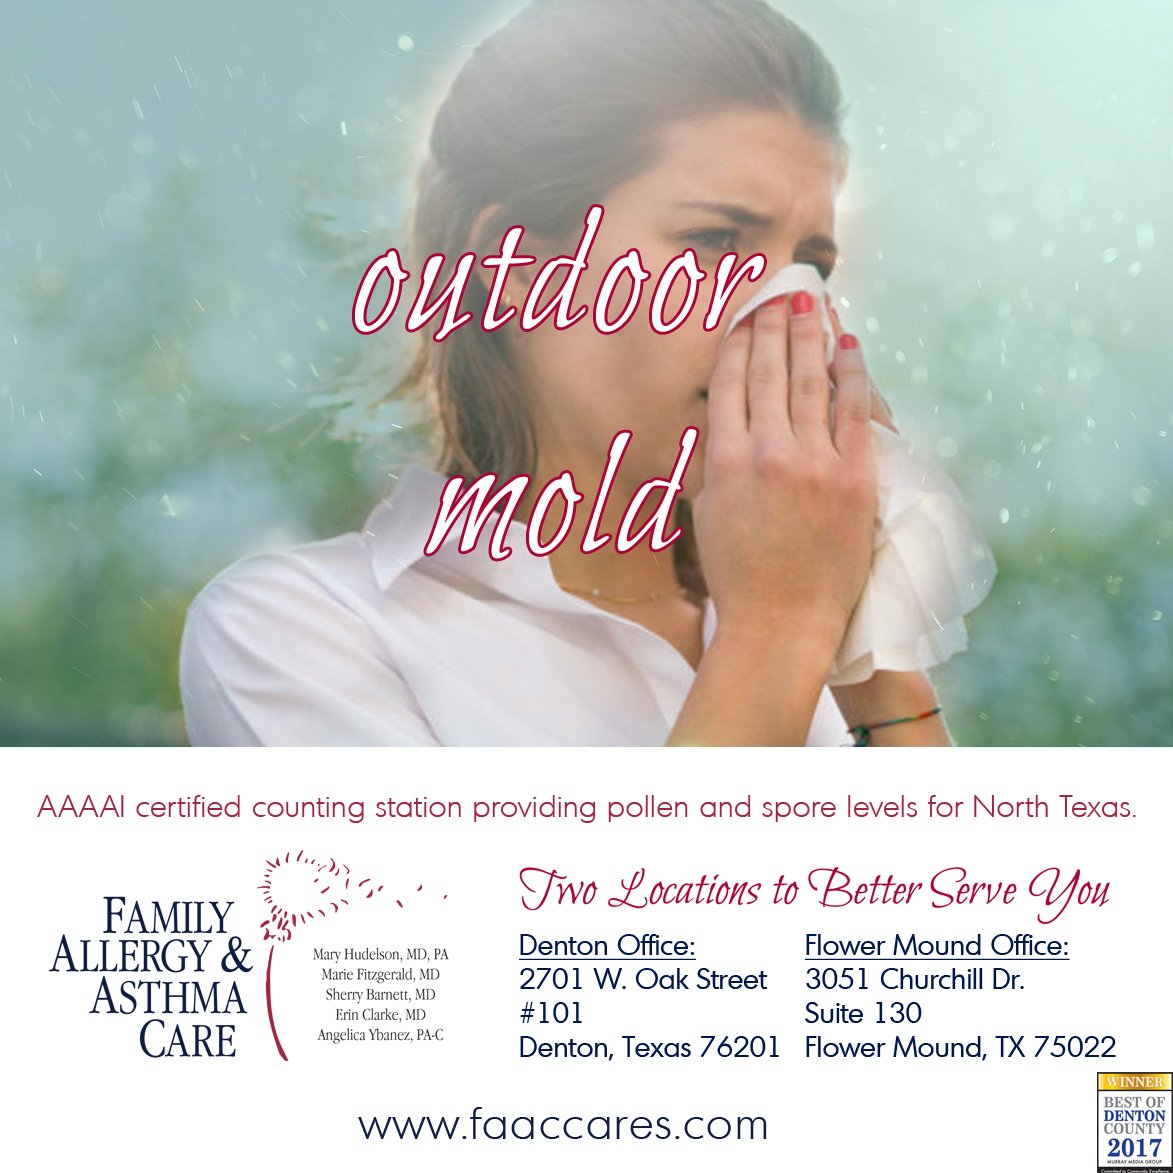 Outdoor mold spores begin to increase as the temperatures rise in the spring.  Learn how we can help you breath easier this year. bit.ly/2ubm9nl #moldspores #mold #springallergies #springasthma #familyallergy #familyasthma #asthmacare #allergycare #northtexas